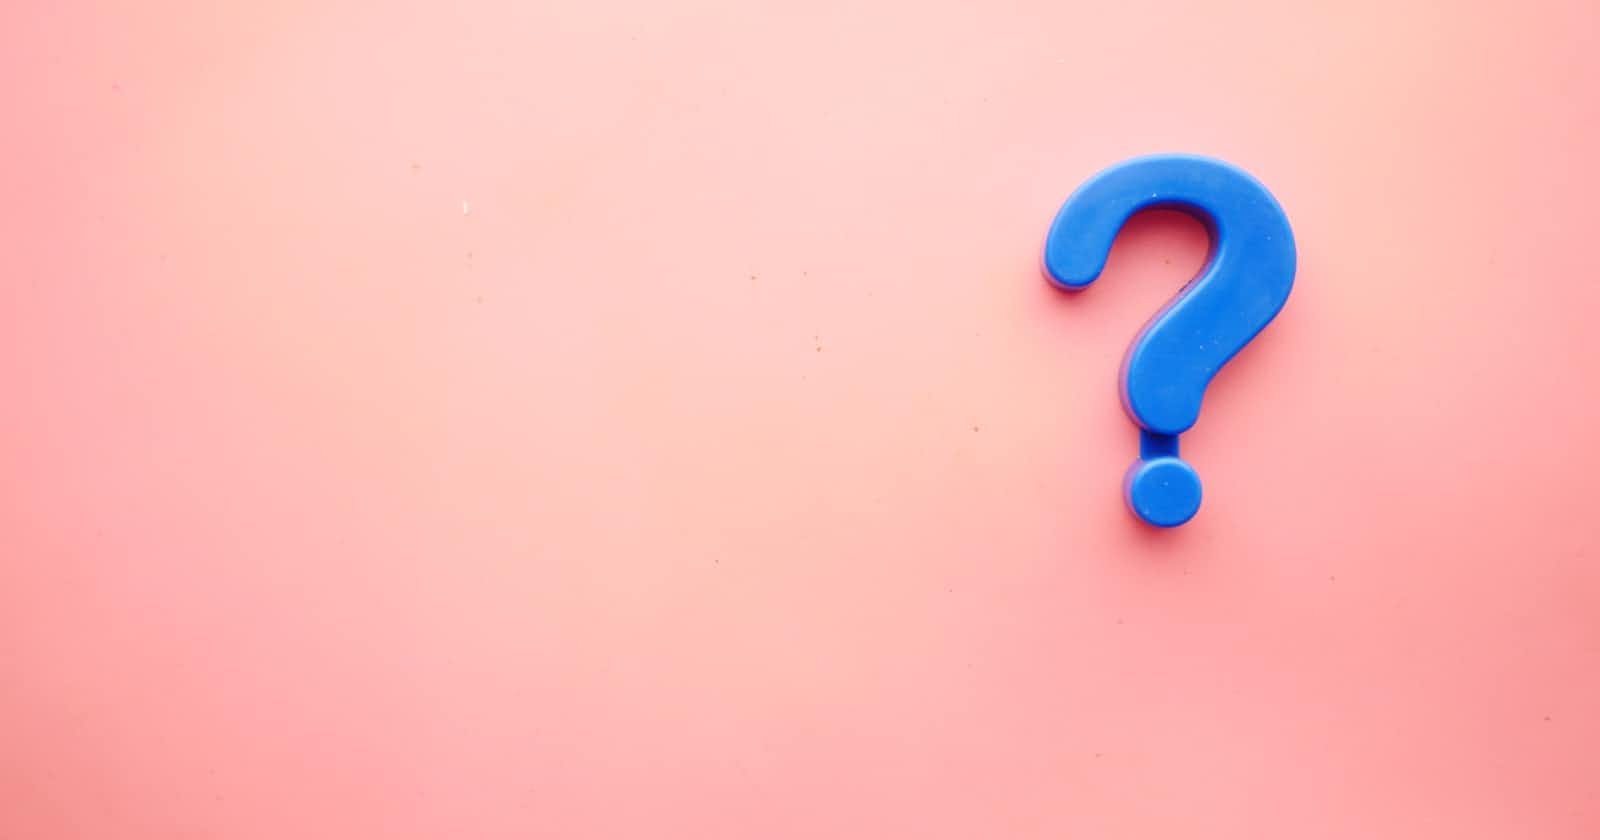 Mastering the Art of Asking: A Guide to Crafting Well-Formatted Questions